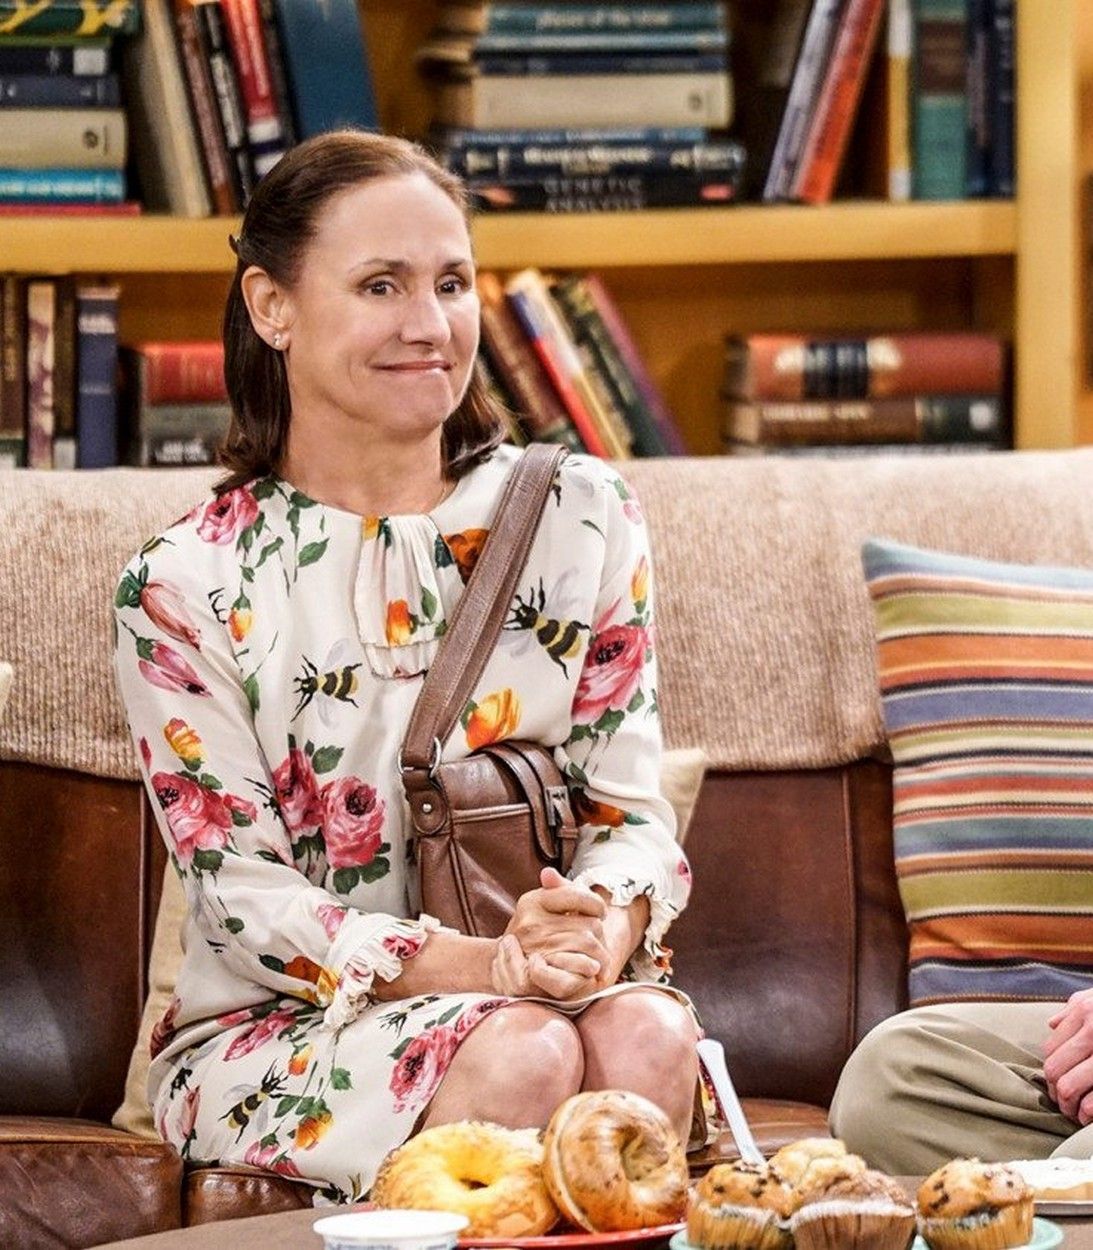 Laurie Metcalf as Mary in Big Bang Theory vertical